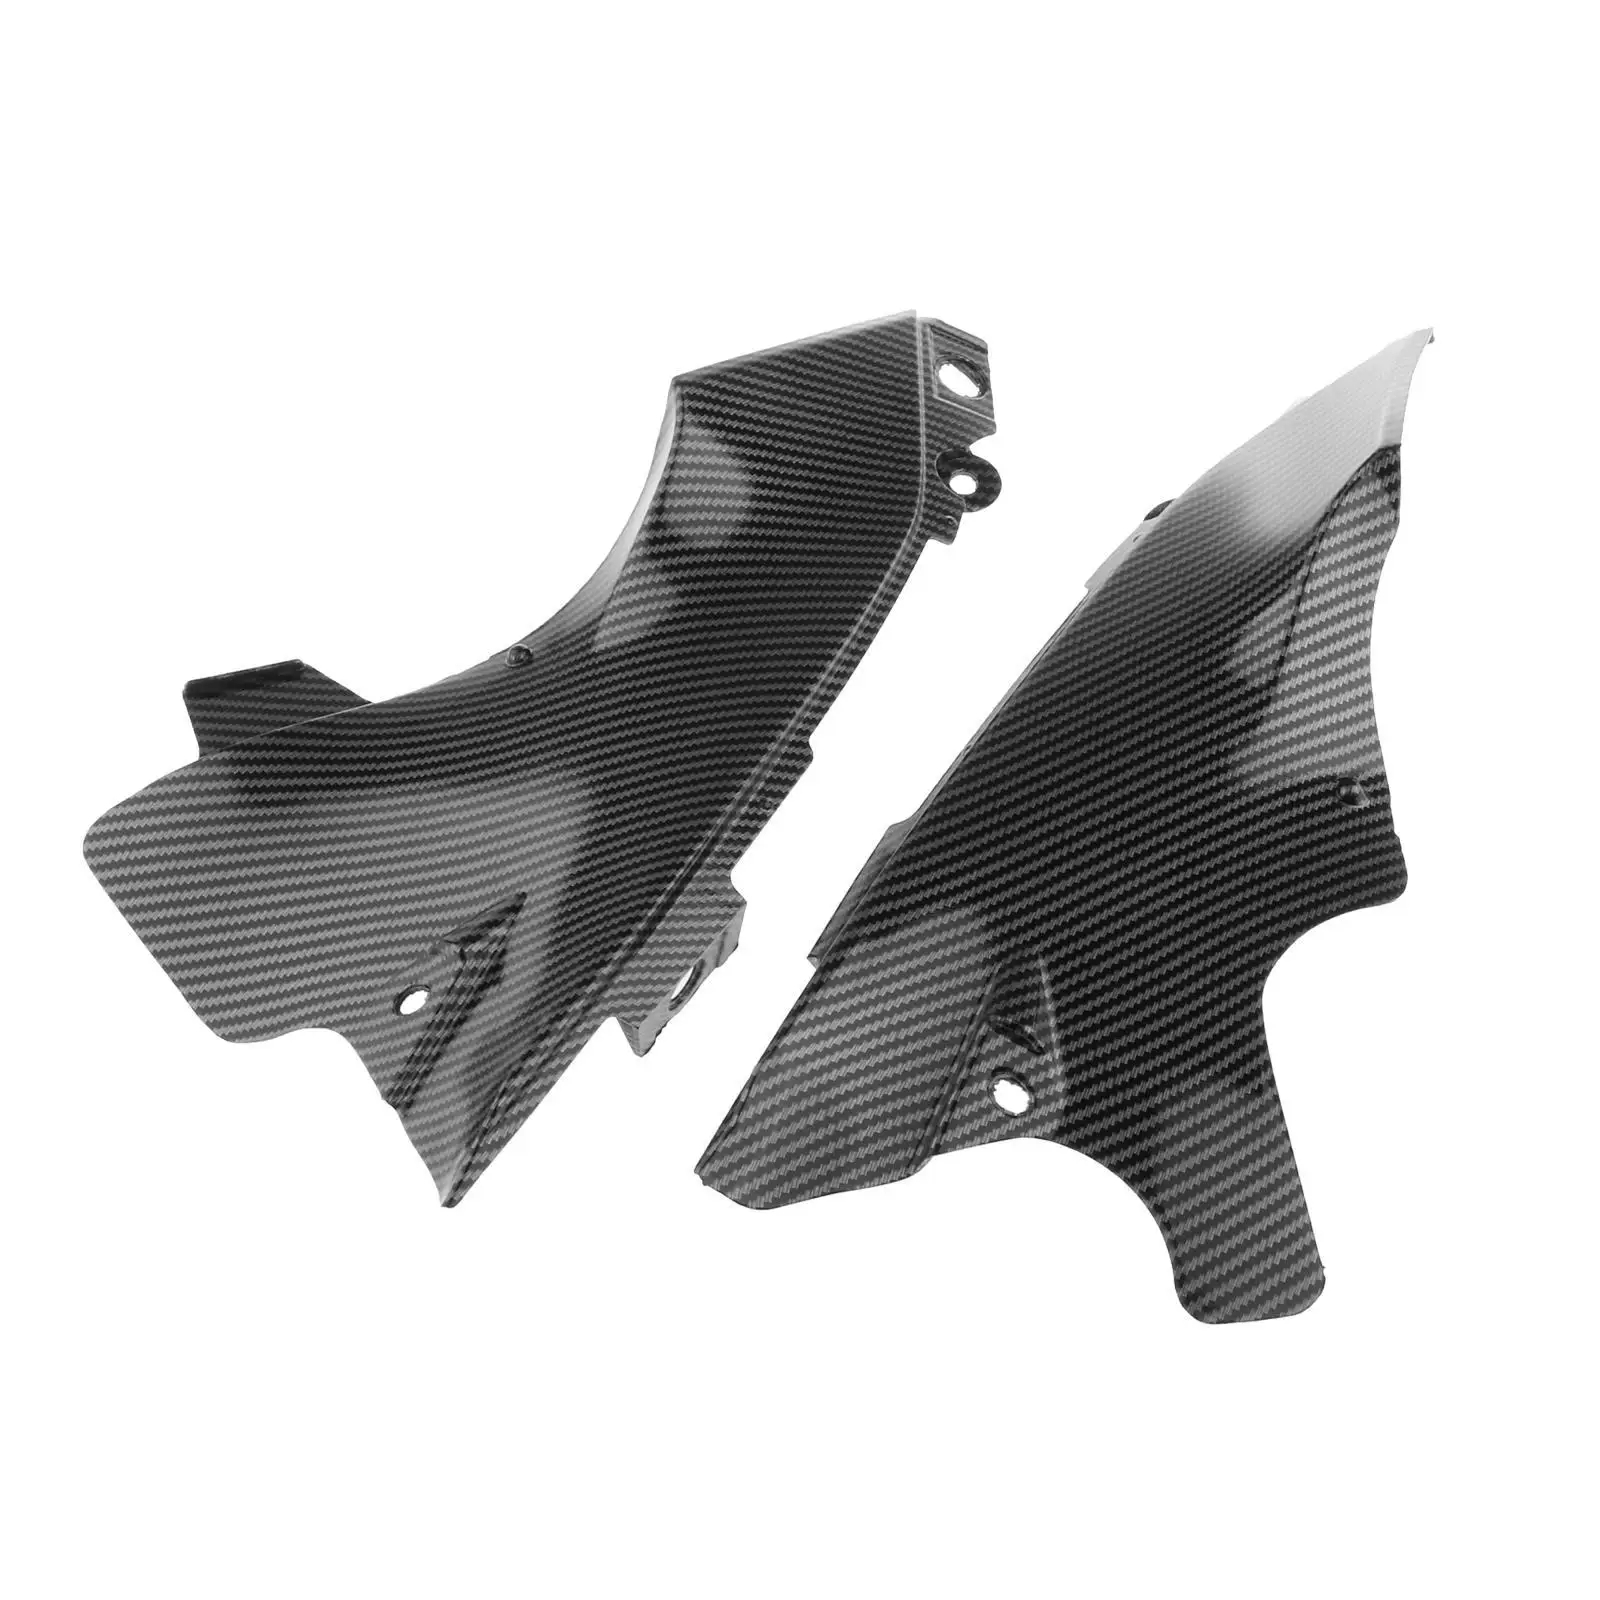  Pair  Front  Cover Fairing for  R1 2004-2006, Easy to Install